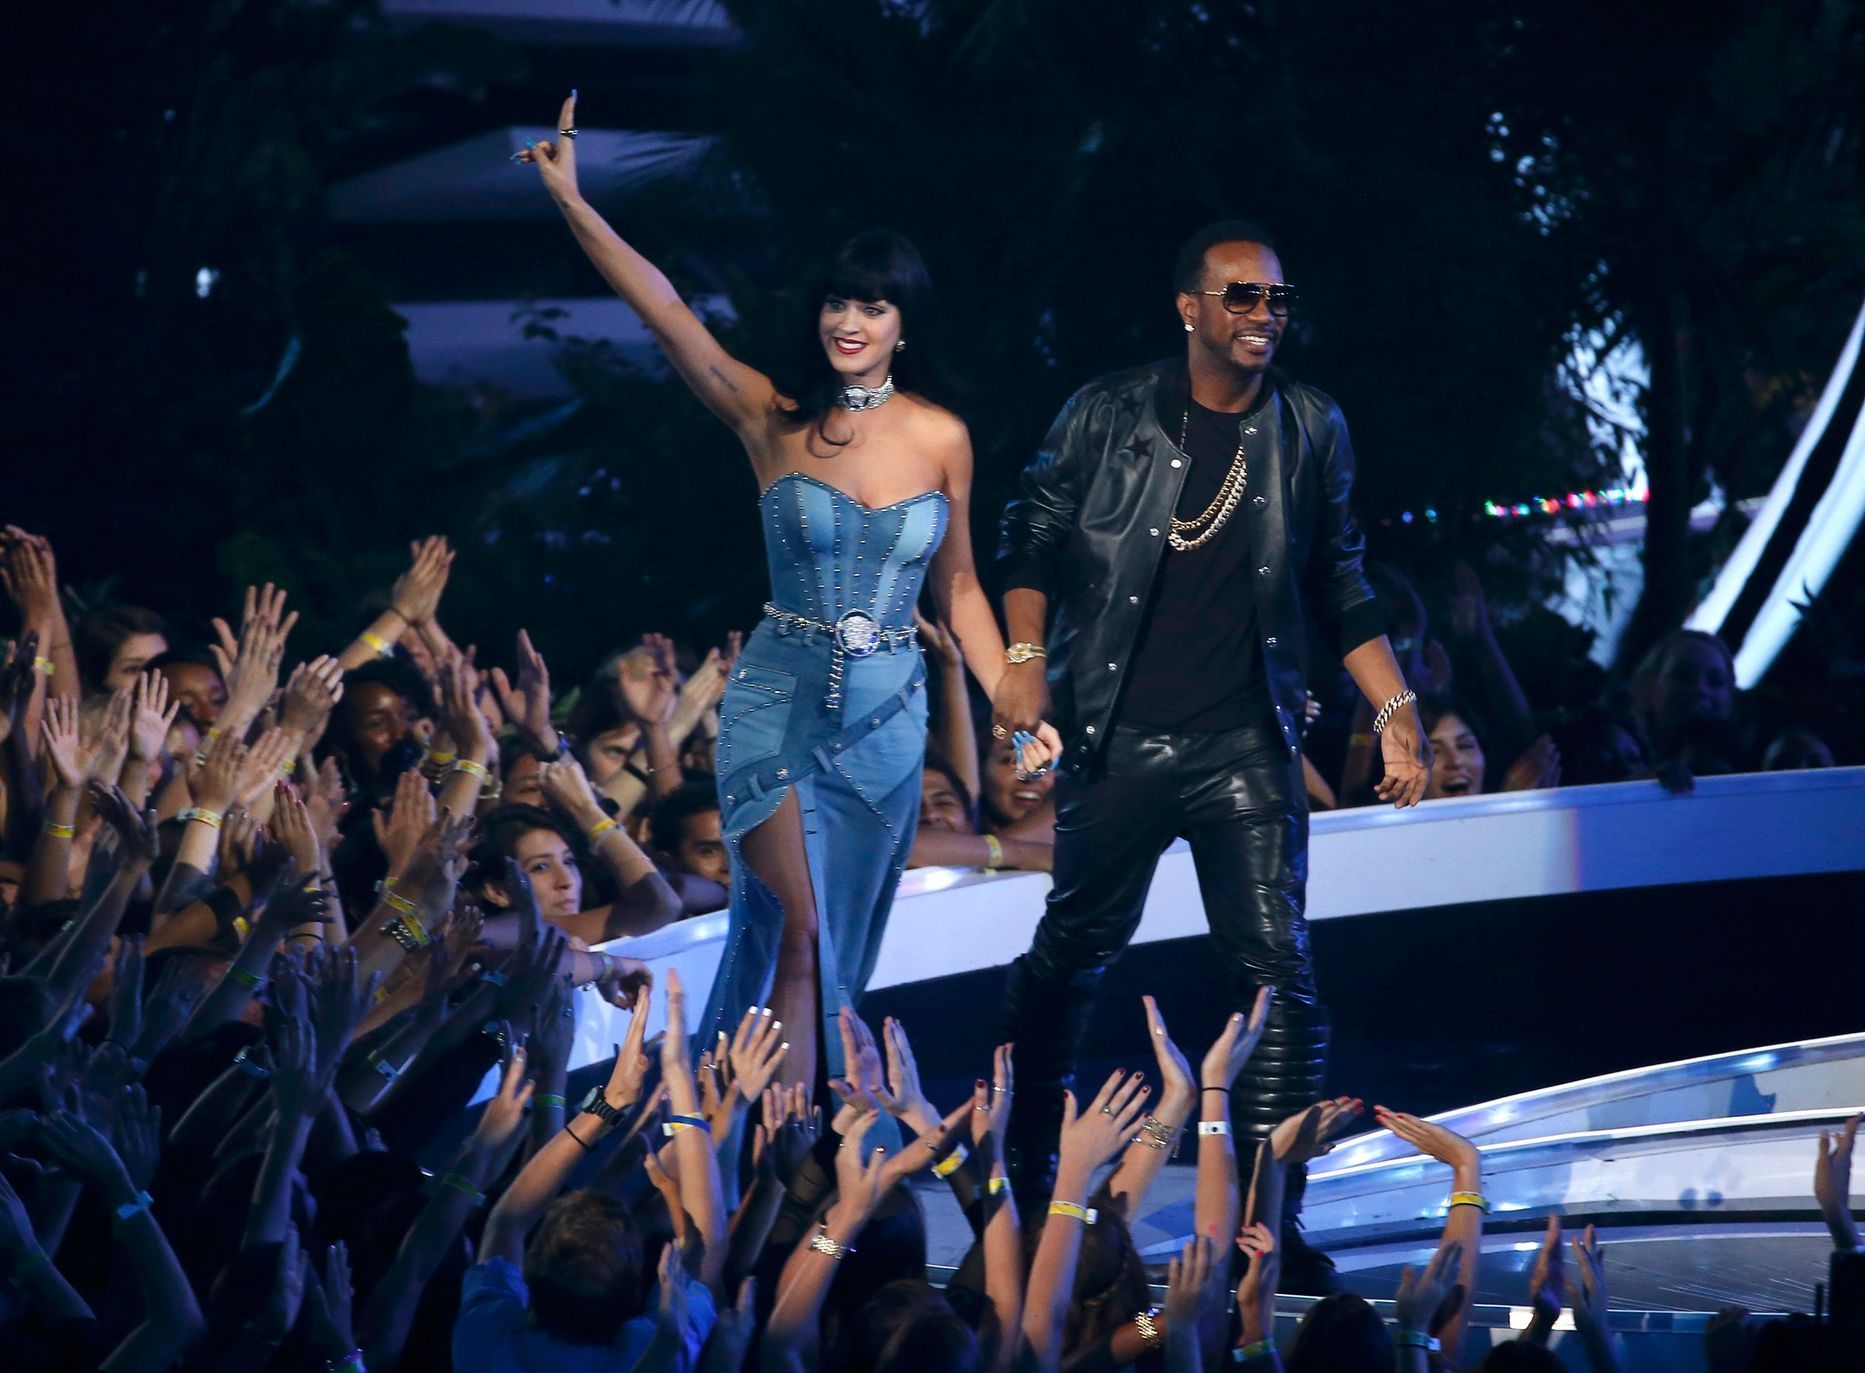 Katy Perry and Juicy J take the stage to accept the award for best female video for &quot;Dark Horse&quot; during the 2014 MTV Video Music Awards in Inglewood